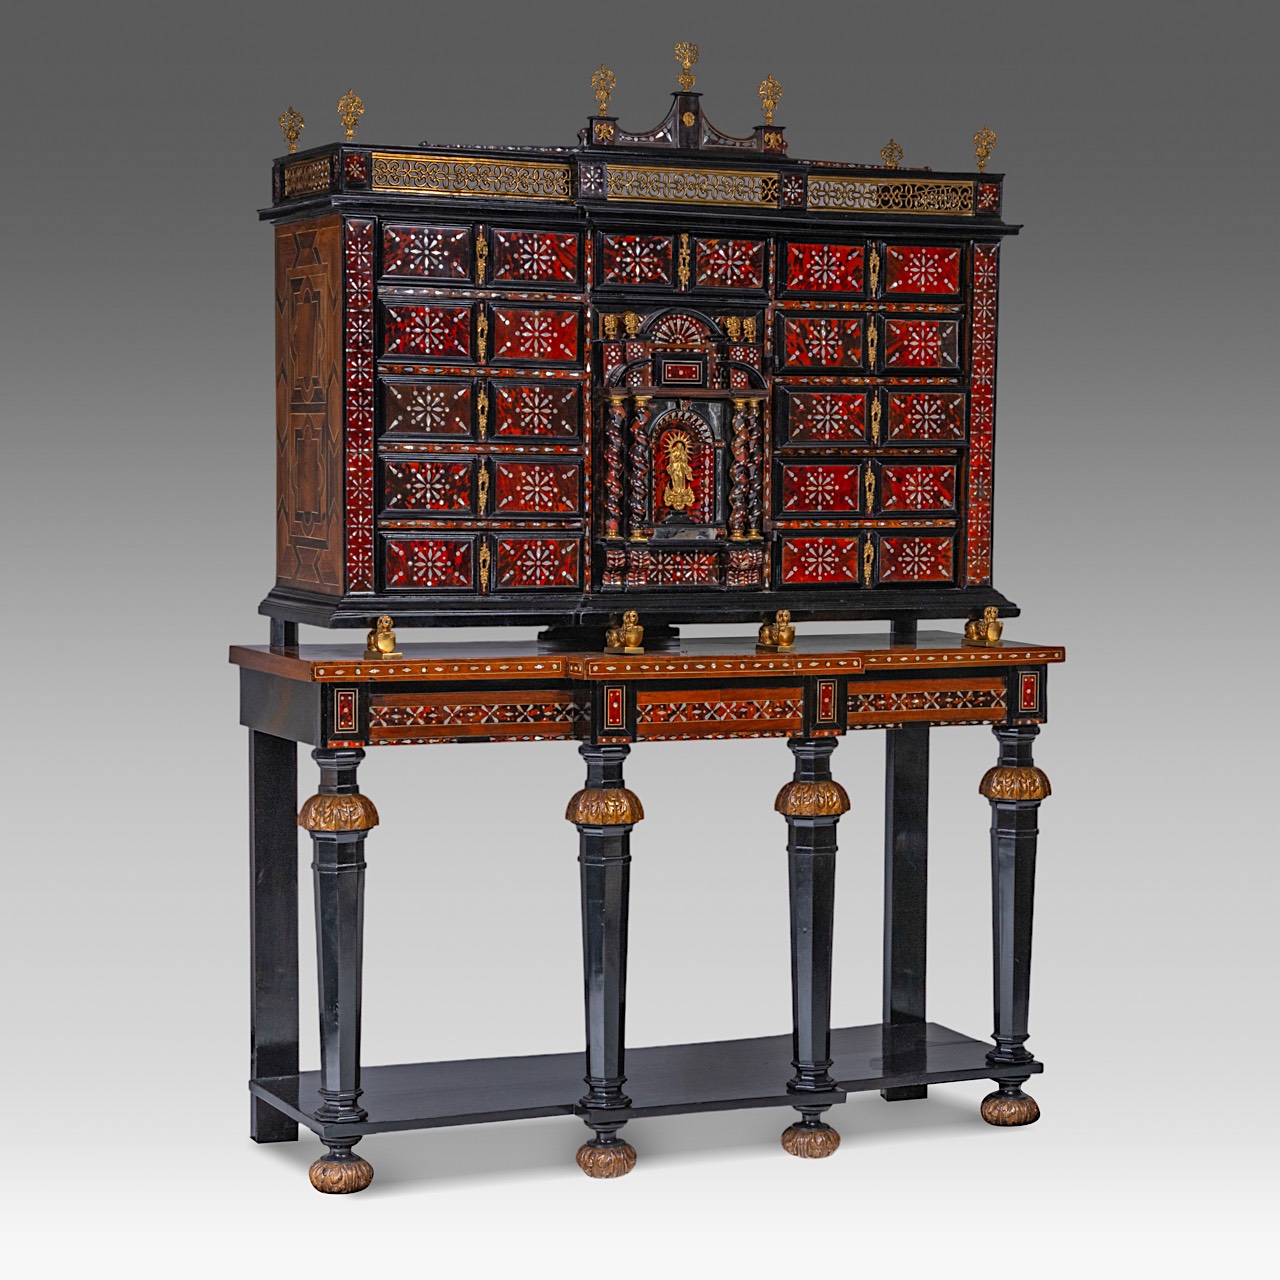 A 17thC cabinet-on-stand, inlaid with tortoiseshell, mother-of-pearl and ivory, H 194 cm (total) (+) - Image 2 of 9